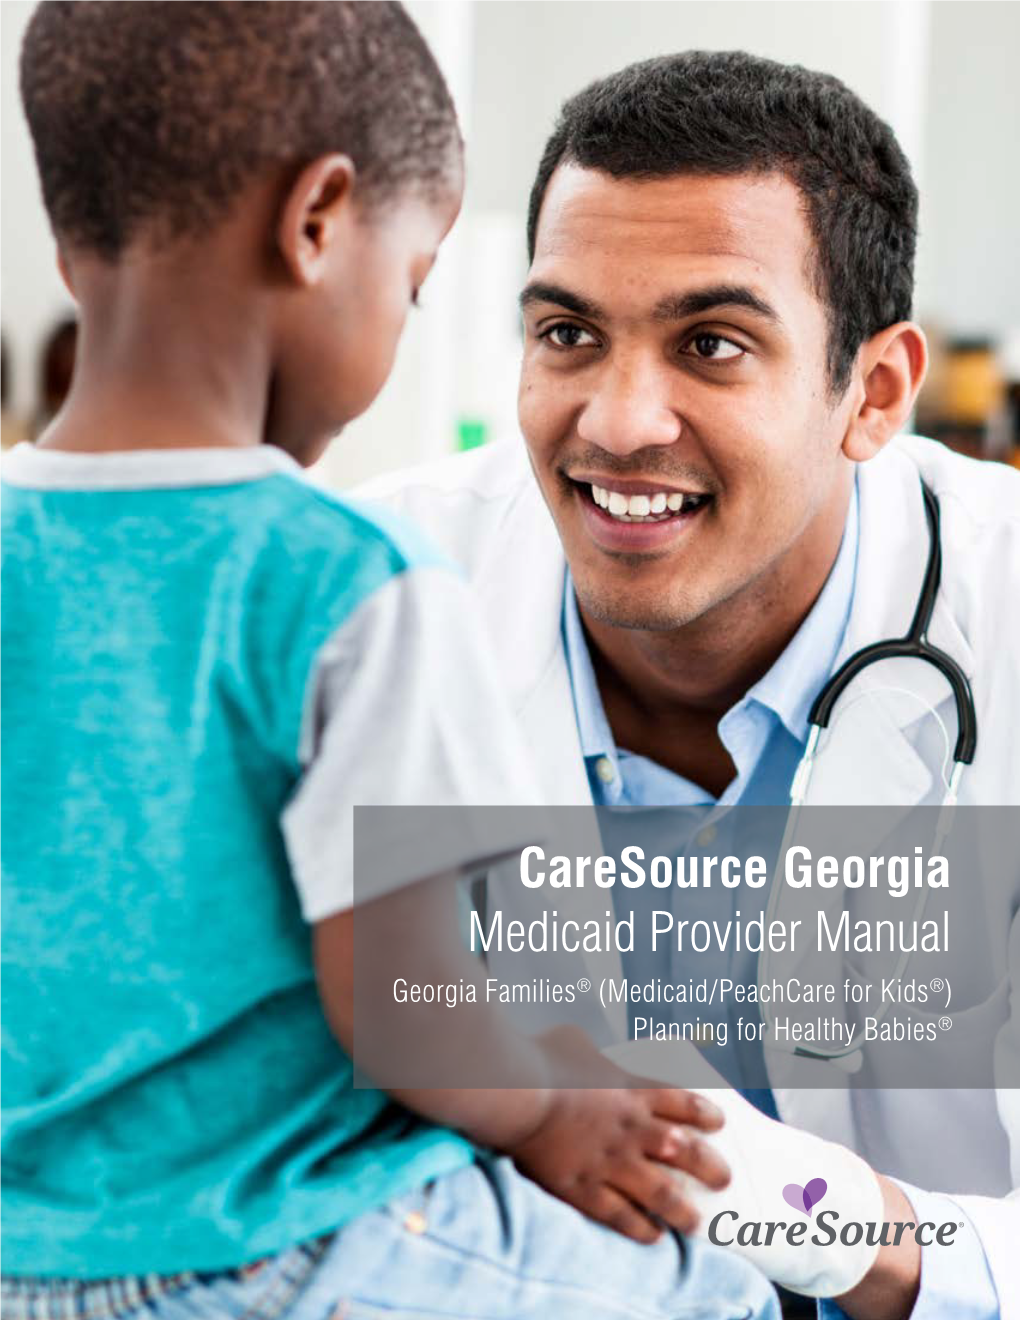 Caresource Georgia Medicaid Provider Manual Georgia Families® (Medicaid/Peachcare for Kids®) Planning for Healthy Babies®